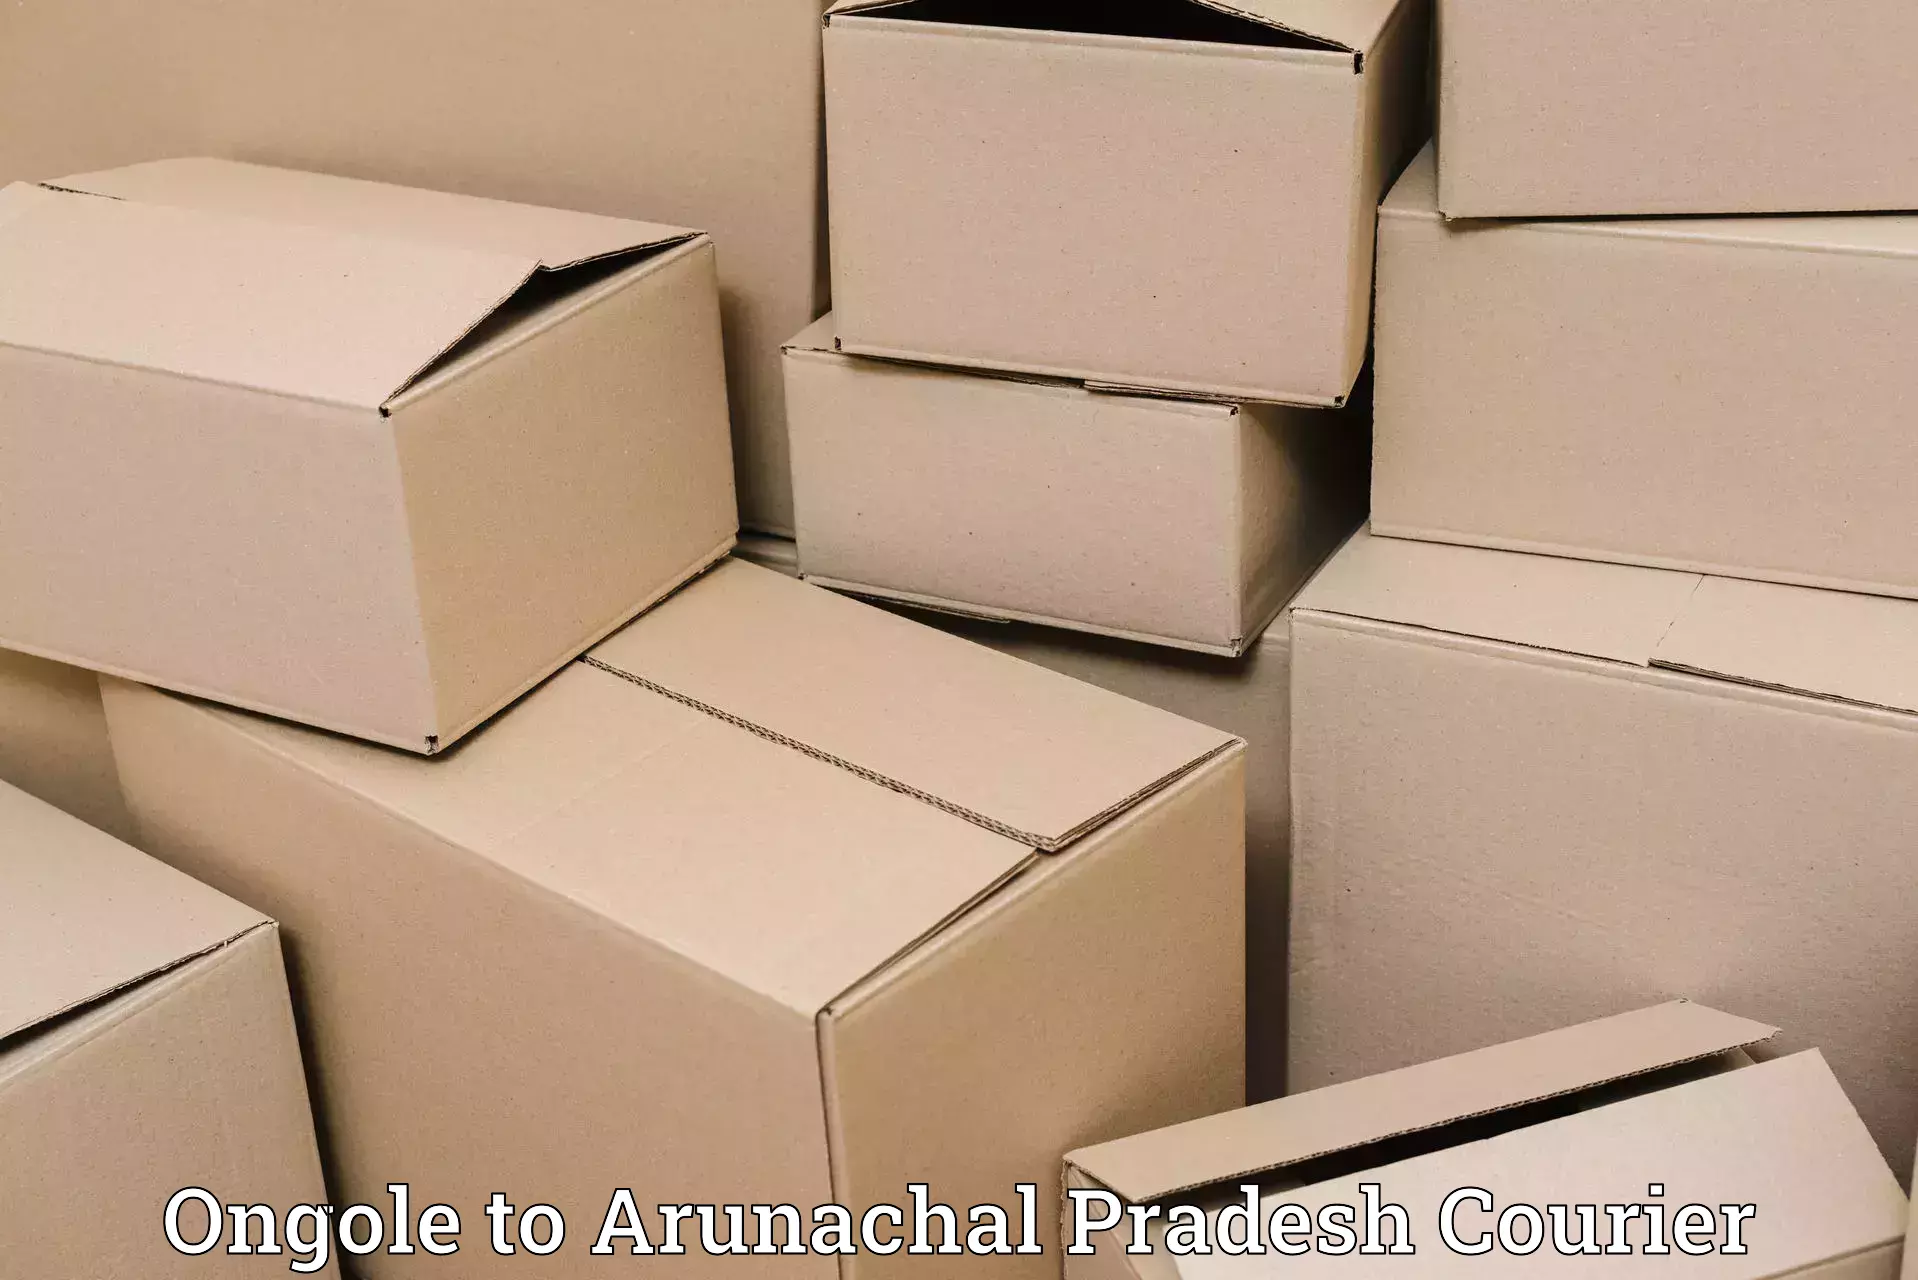 International parcel service Ongole to Aalo